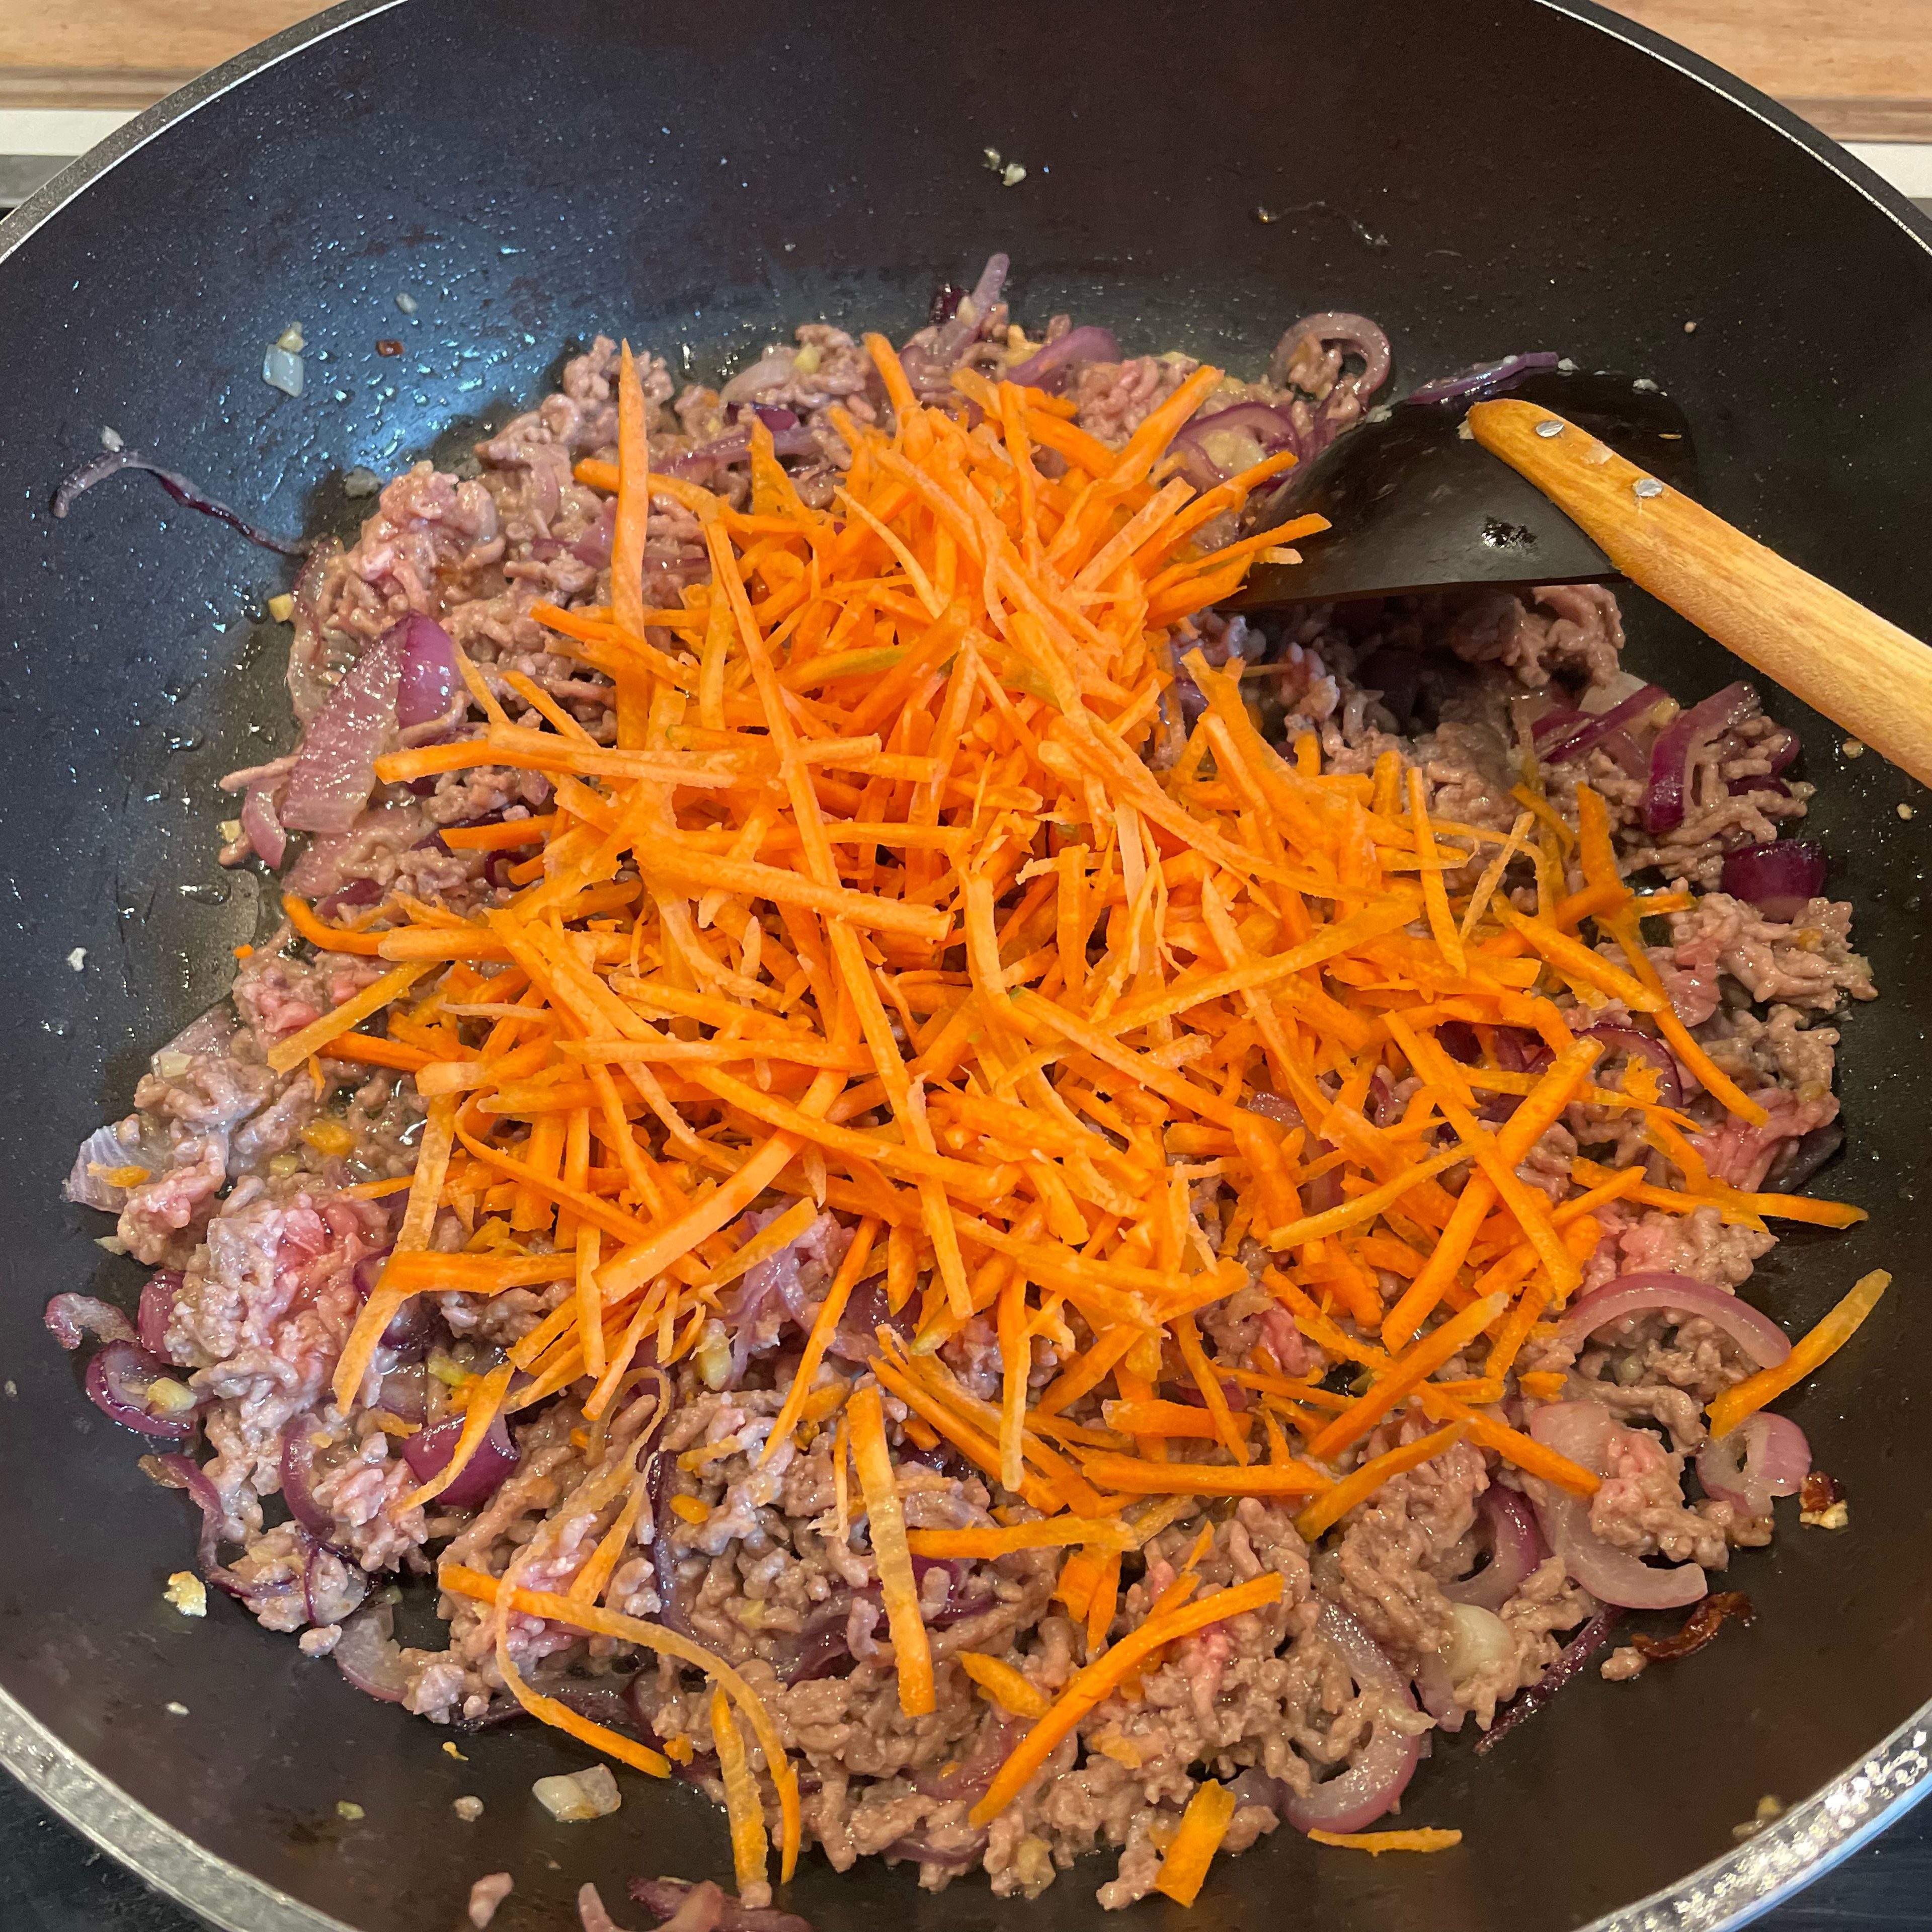 Add a handful of grated carrots, mix an simmer for 2-3 minutes.